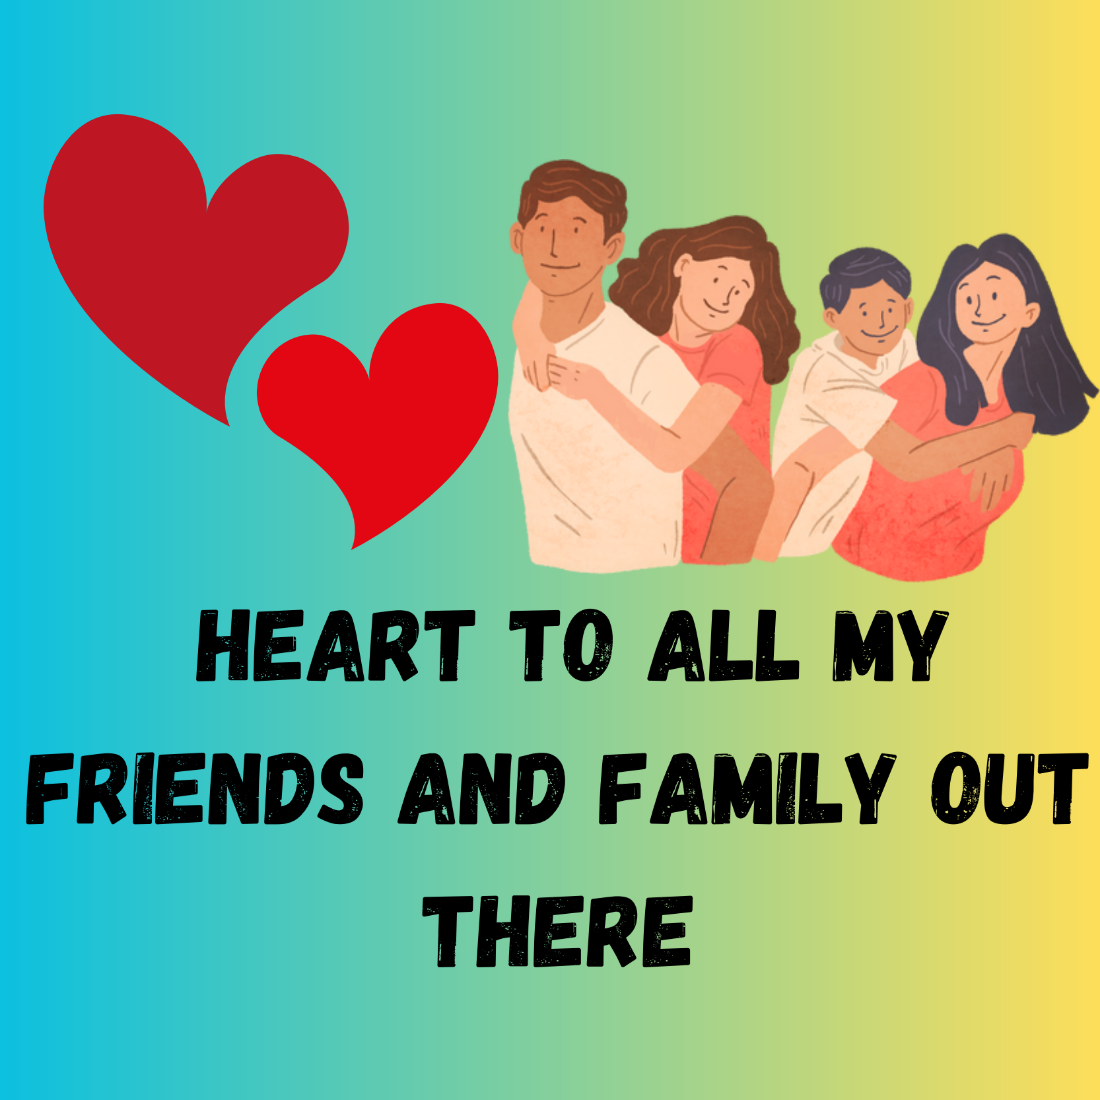 Love with family cover image.